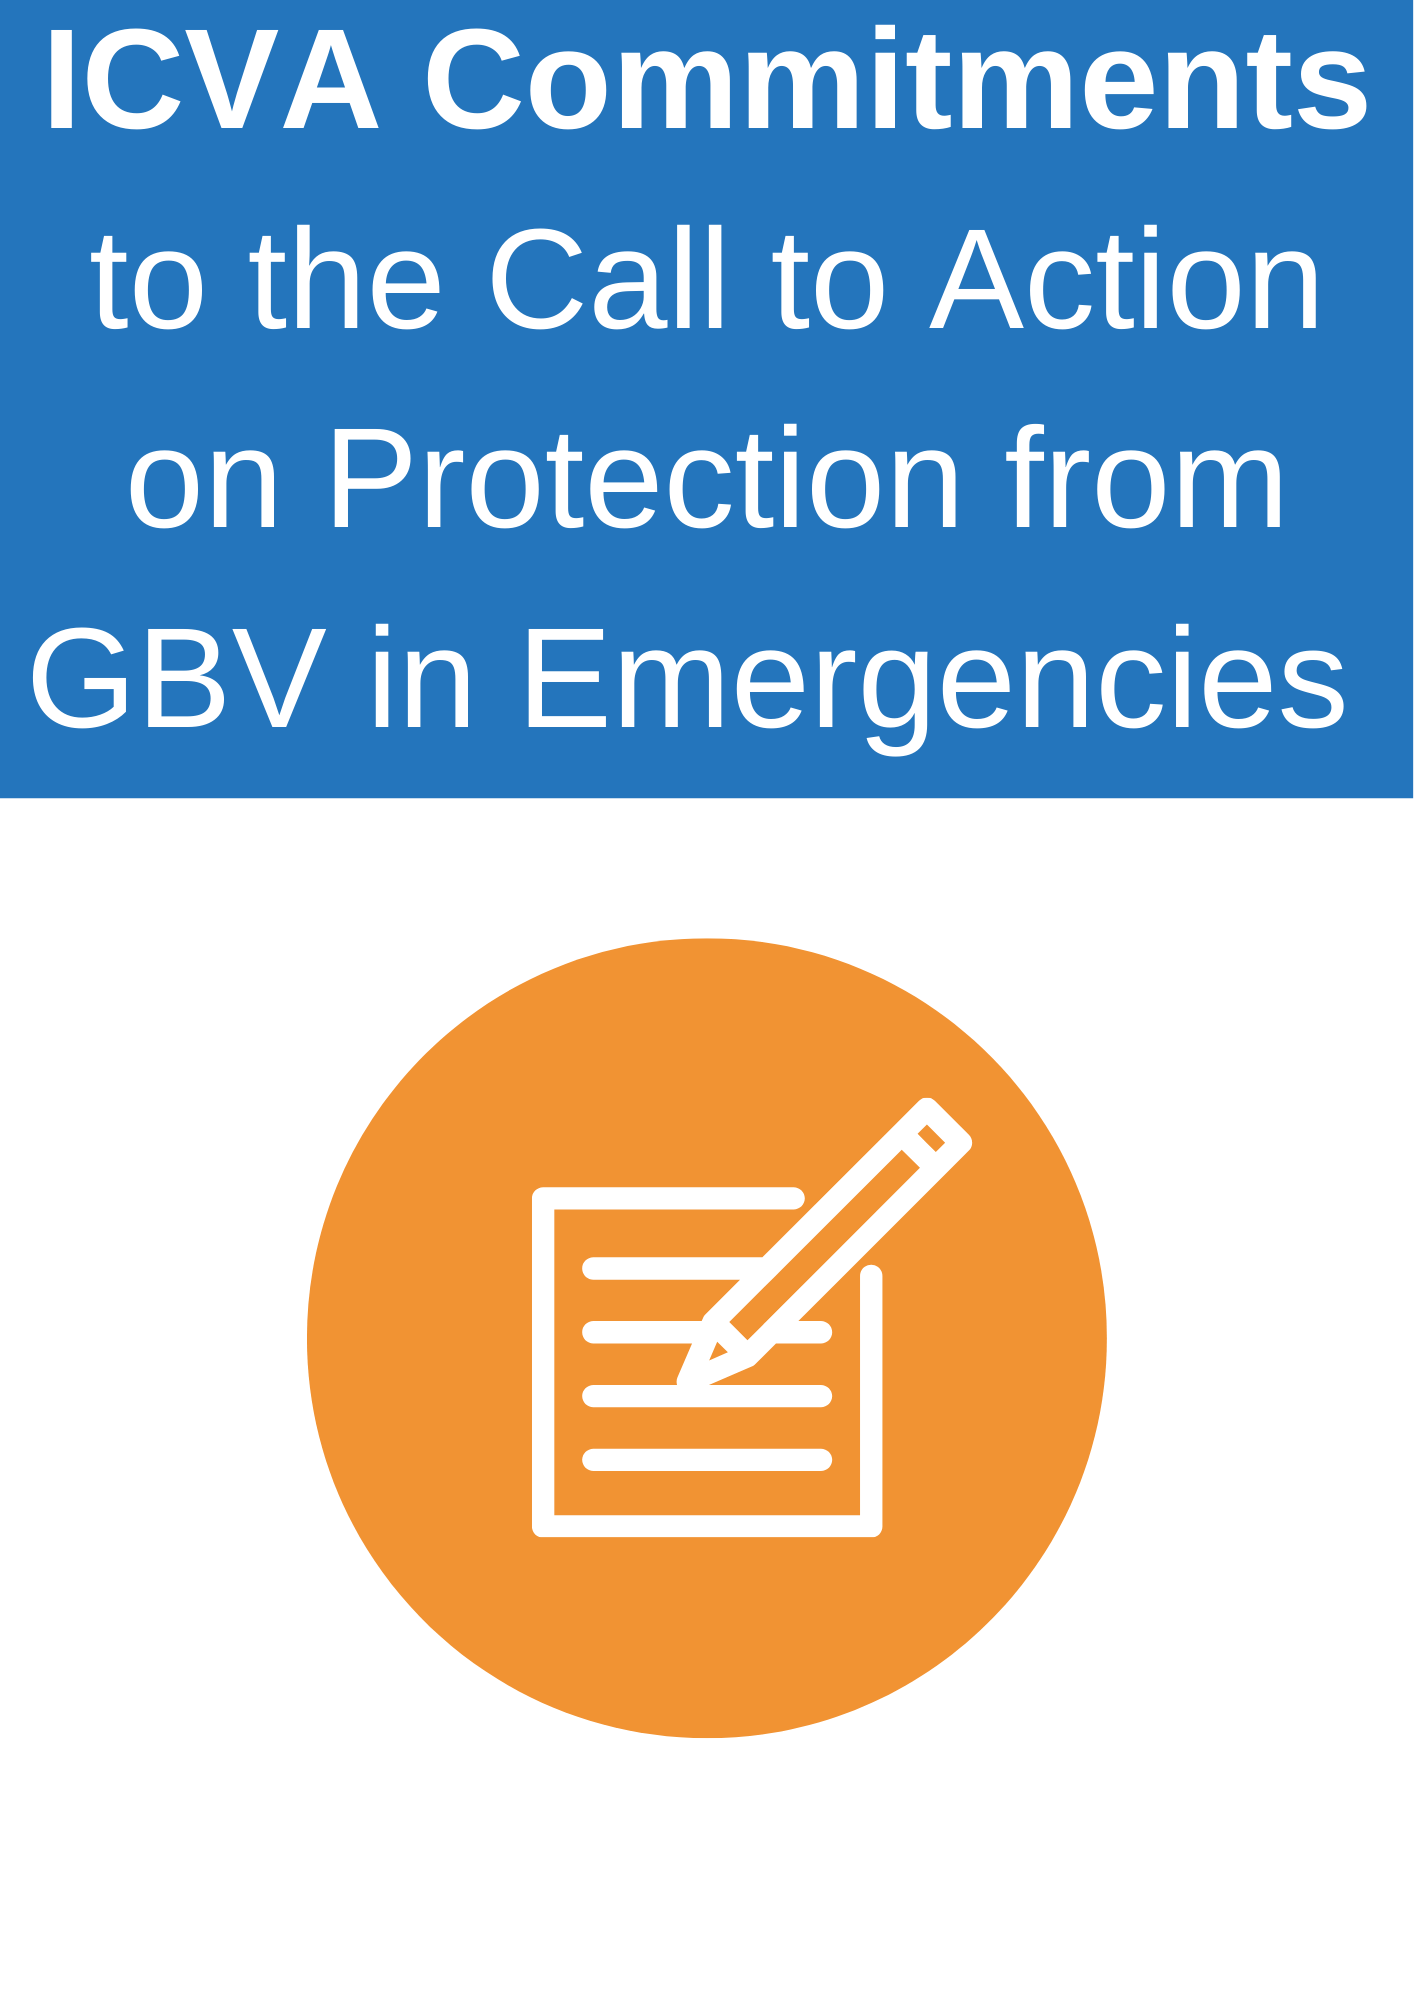 ICVA Commitments to the Call to Action on Protection from GBV